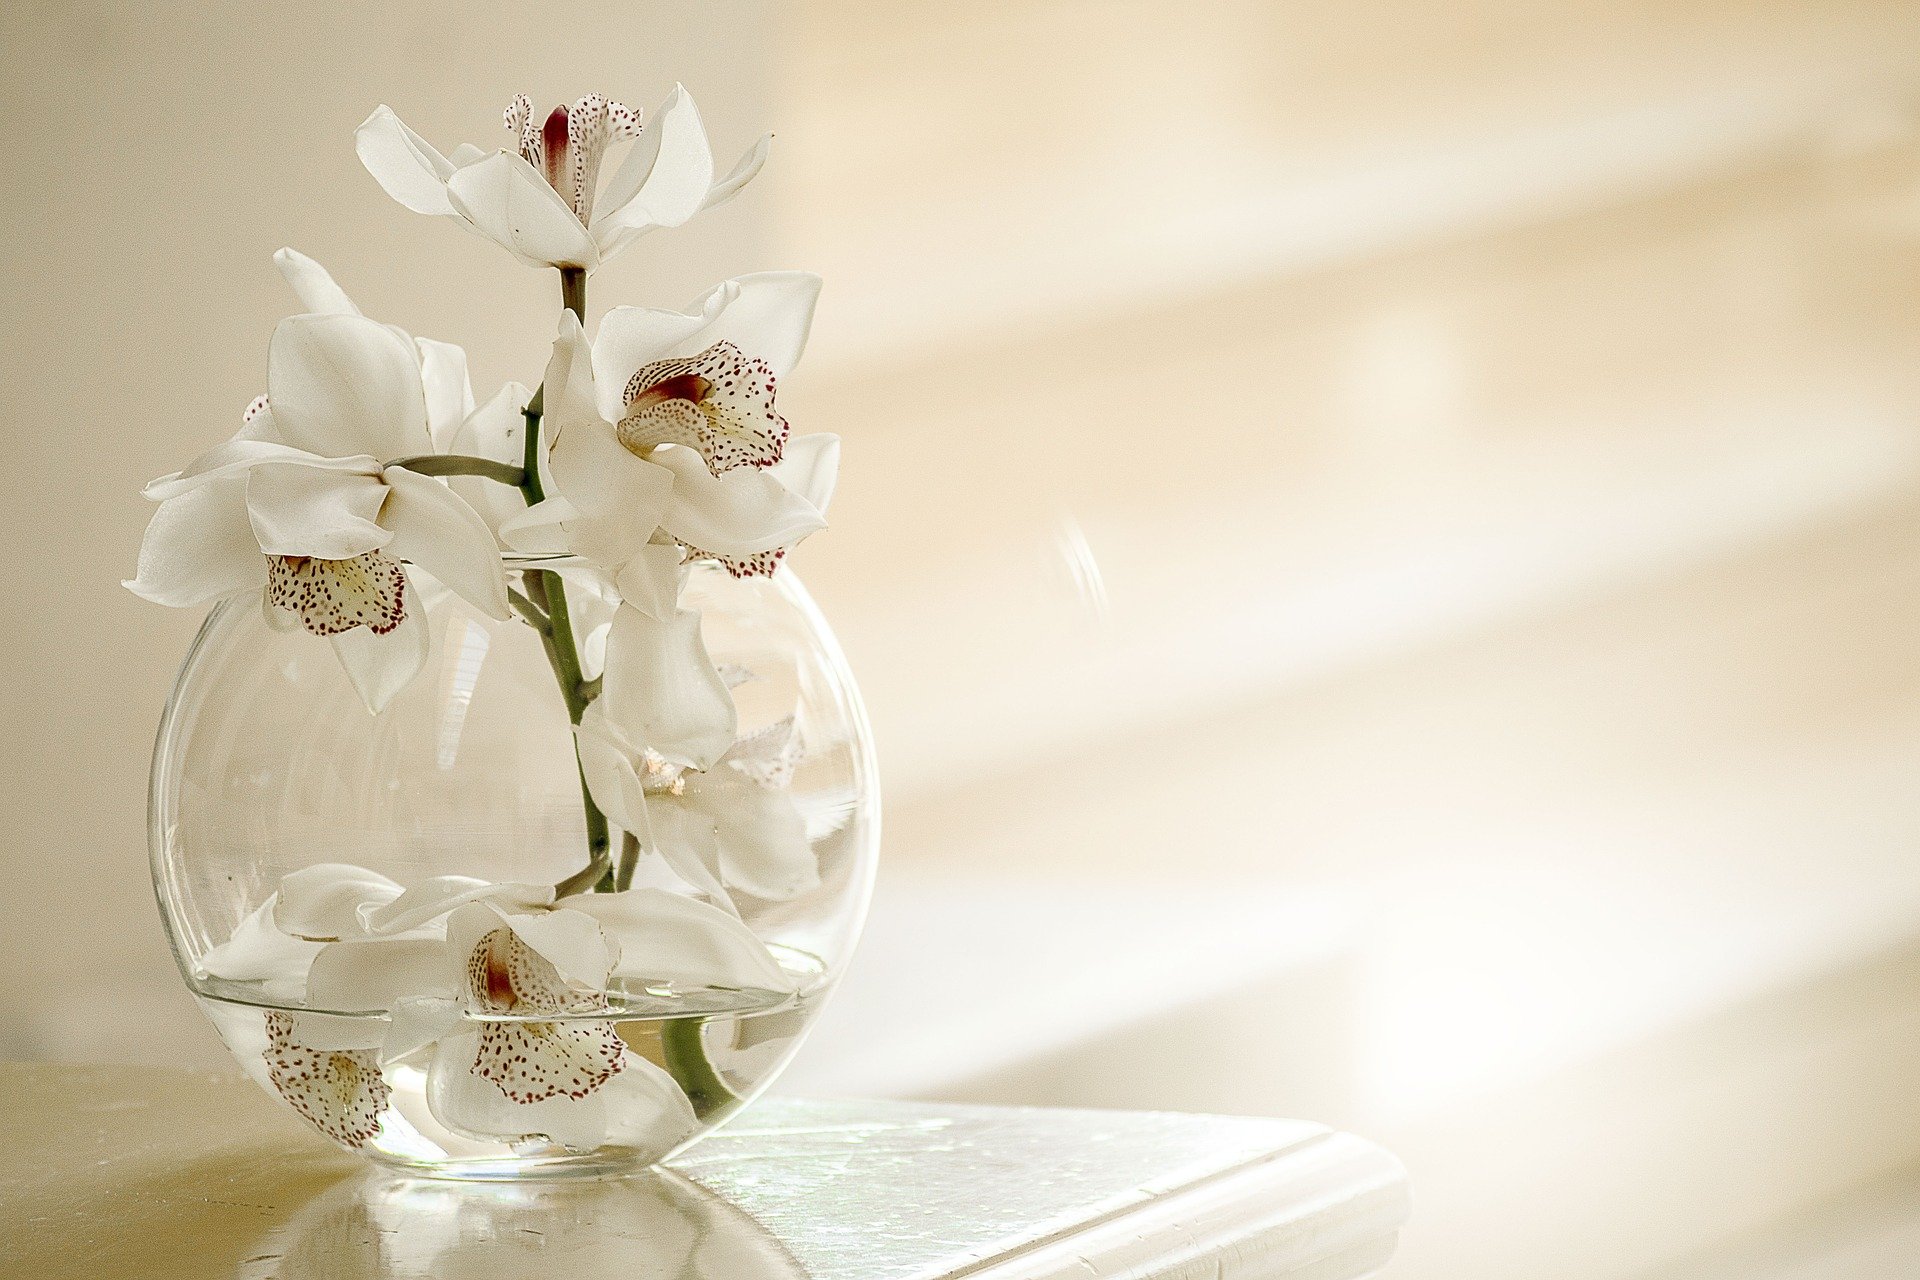 Orchid in a glass bowl. | Source: Pixabay